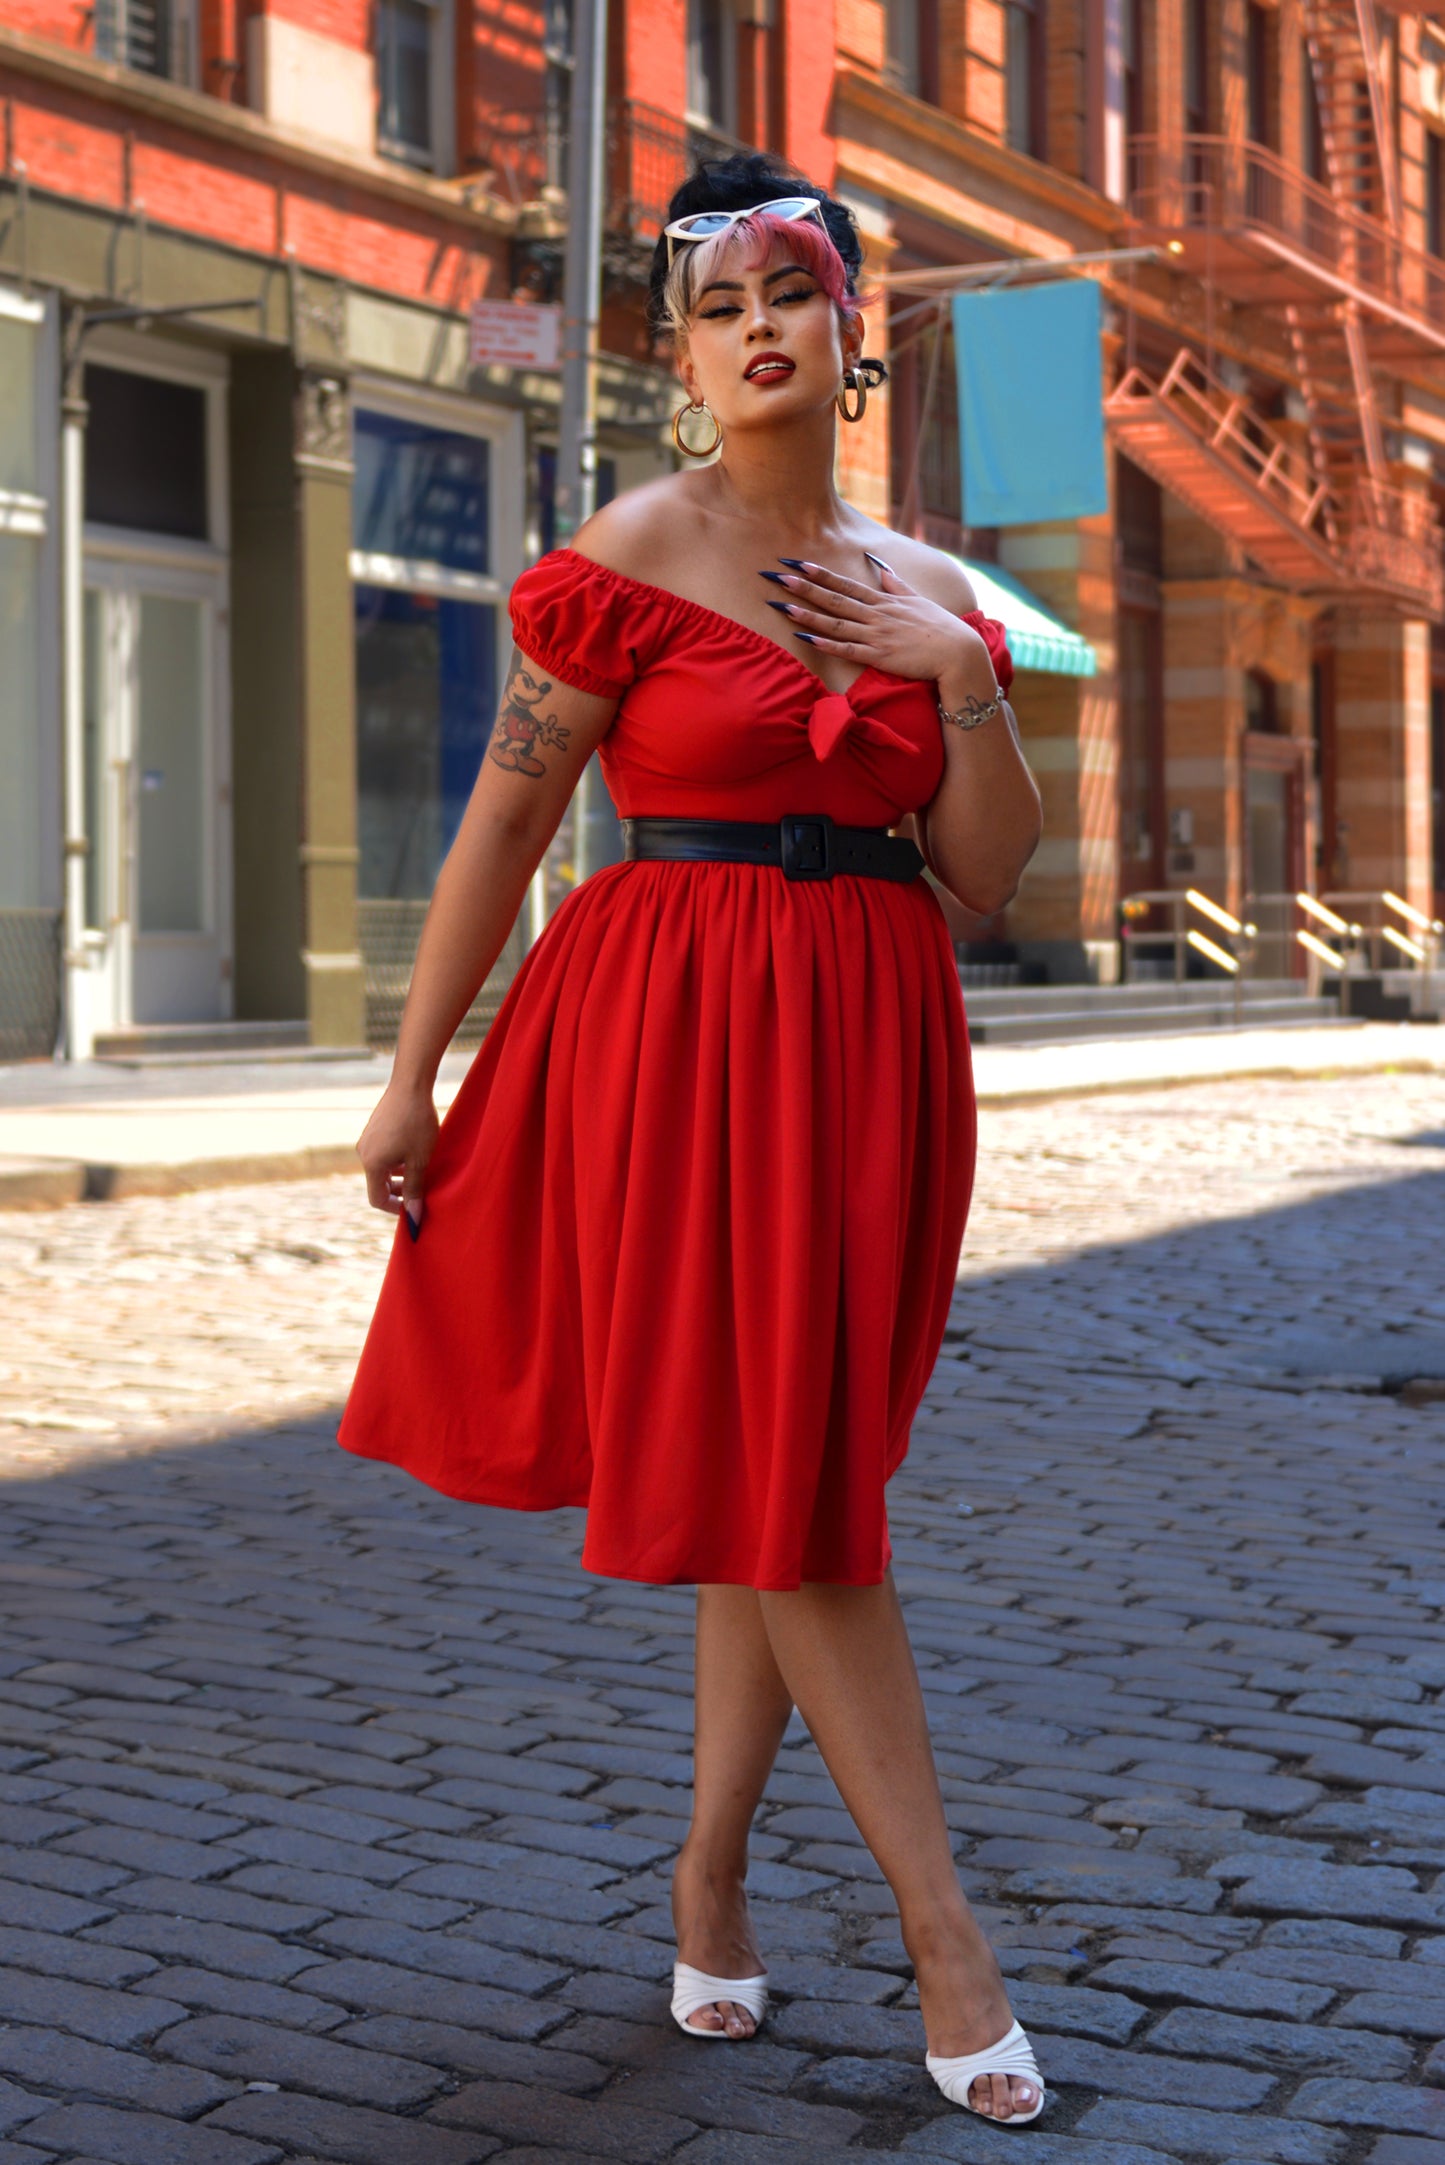 Natalie Peasant Swing Dress in Solid Red Stretch Crepe | Pinup Couture